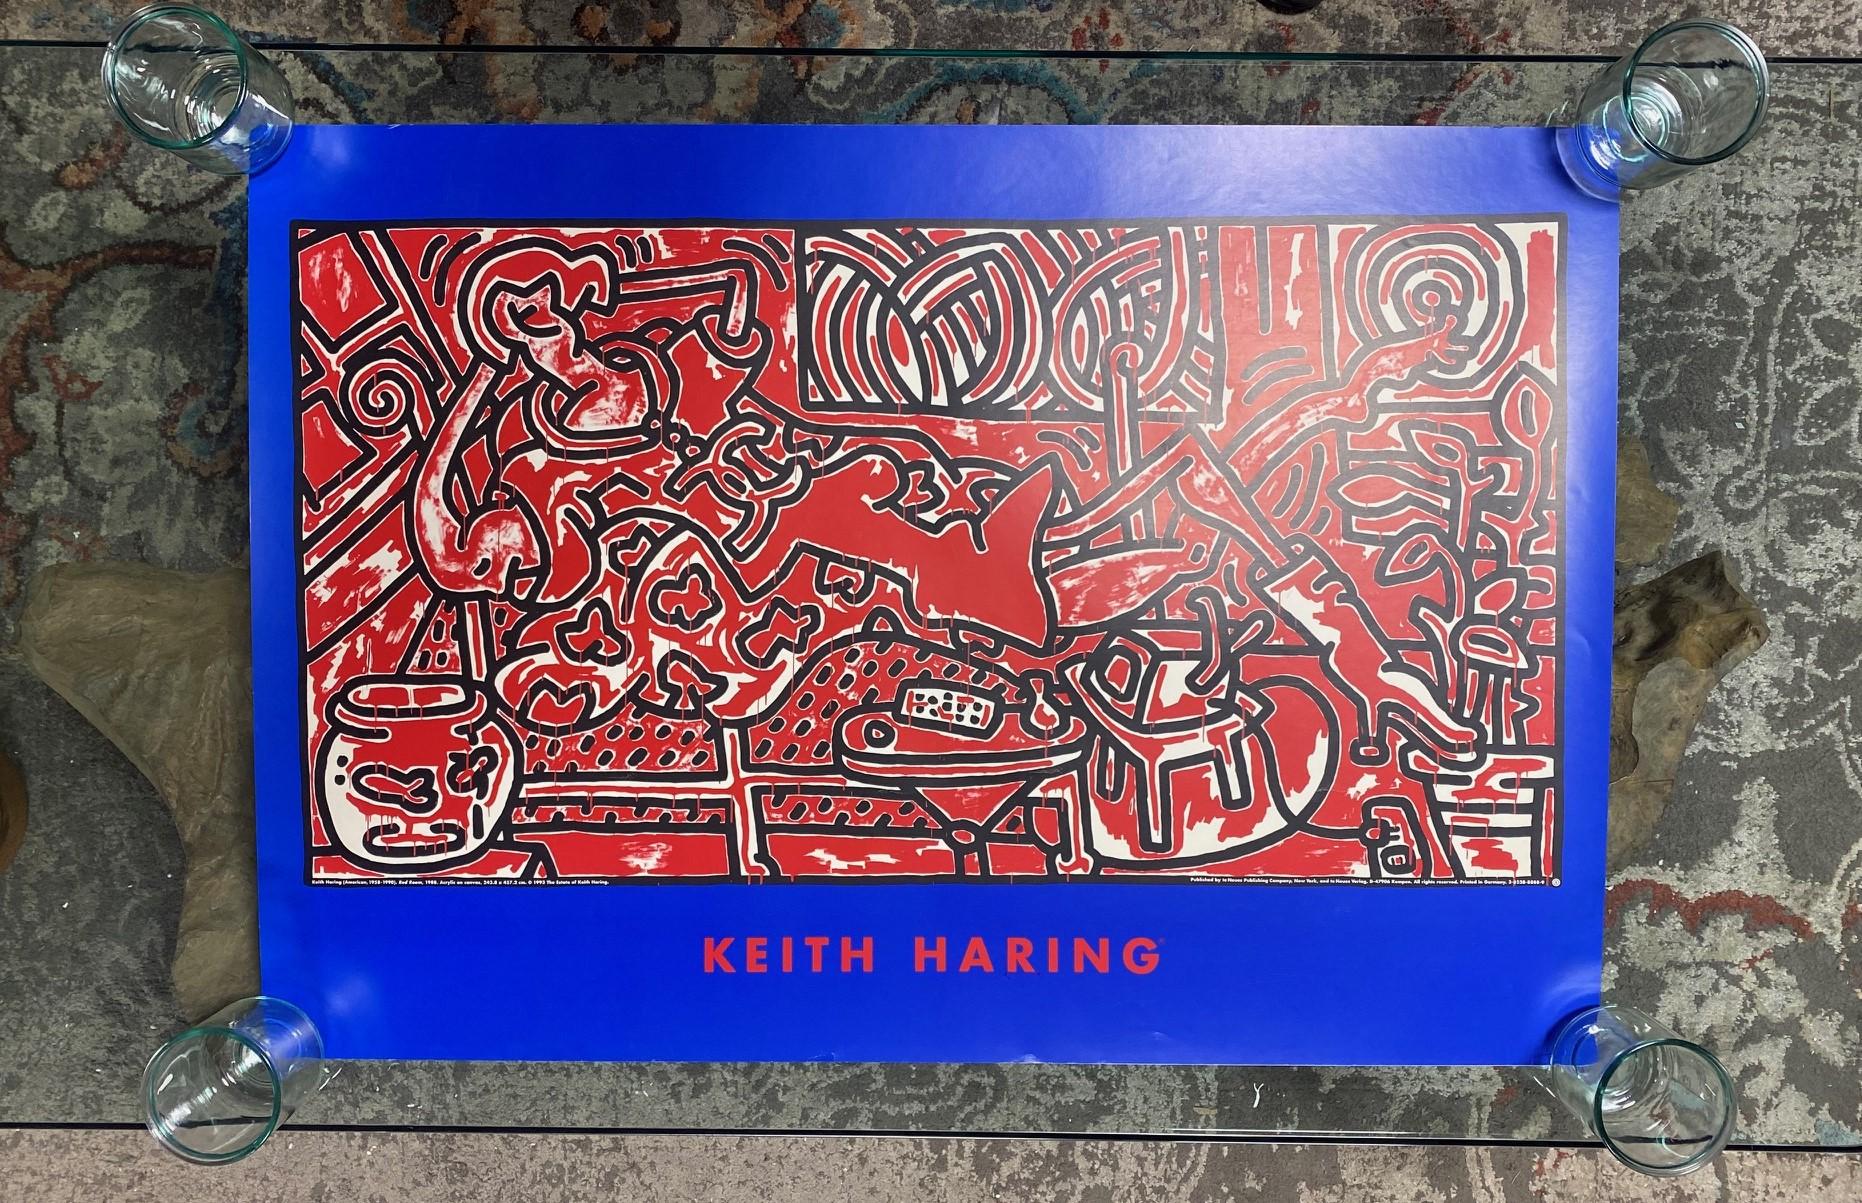 A rare and extremely hard-to-find limited vintage Keith Haring (1958-1990) Pop Shop Art offset lithograph poster titled 